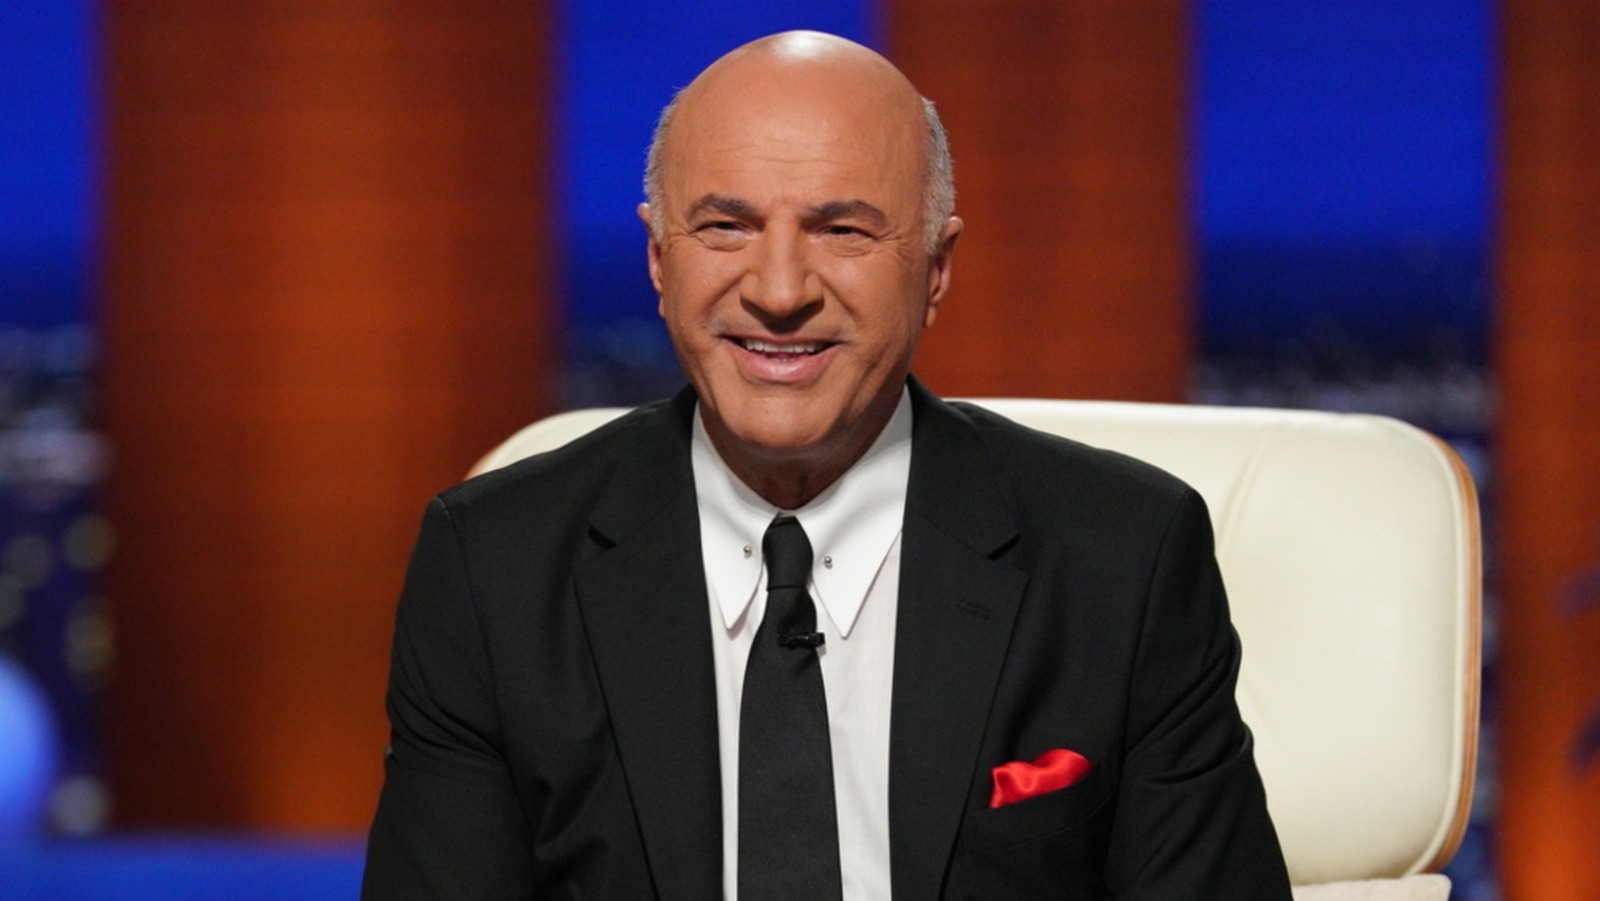 What Do You Know? Shark Tank's Blunt-Talking Mr. Wonderful is also